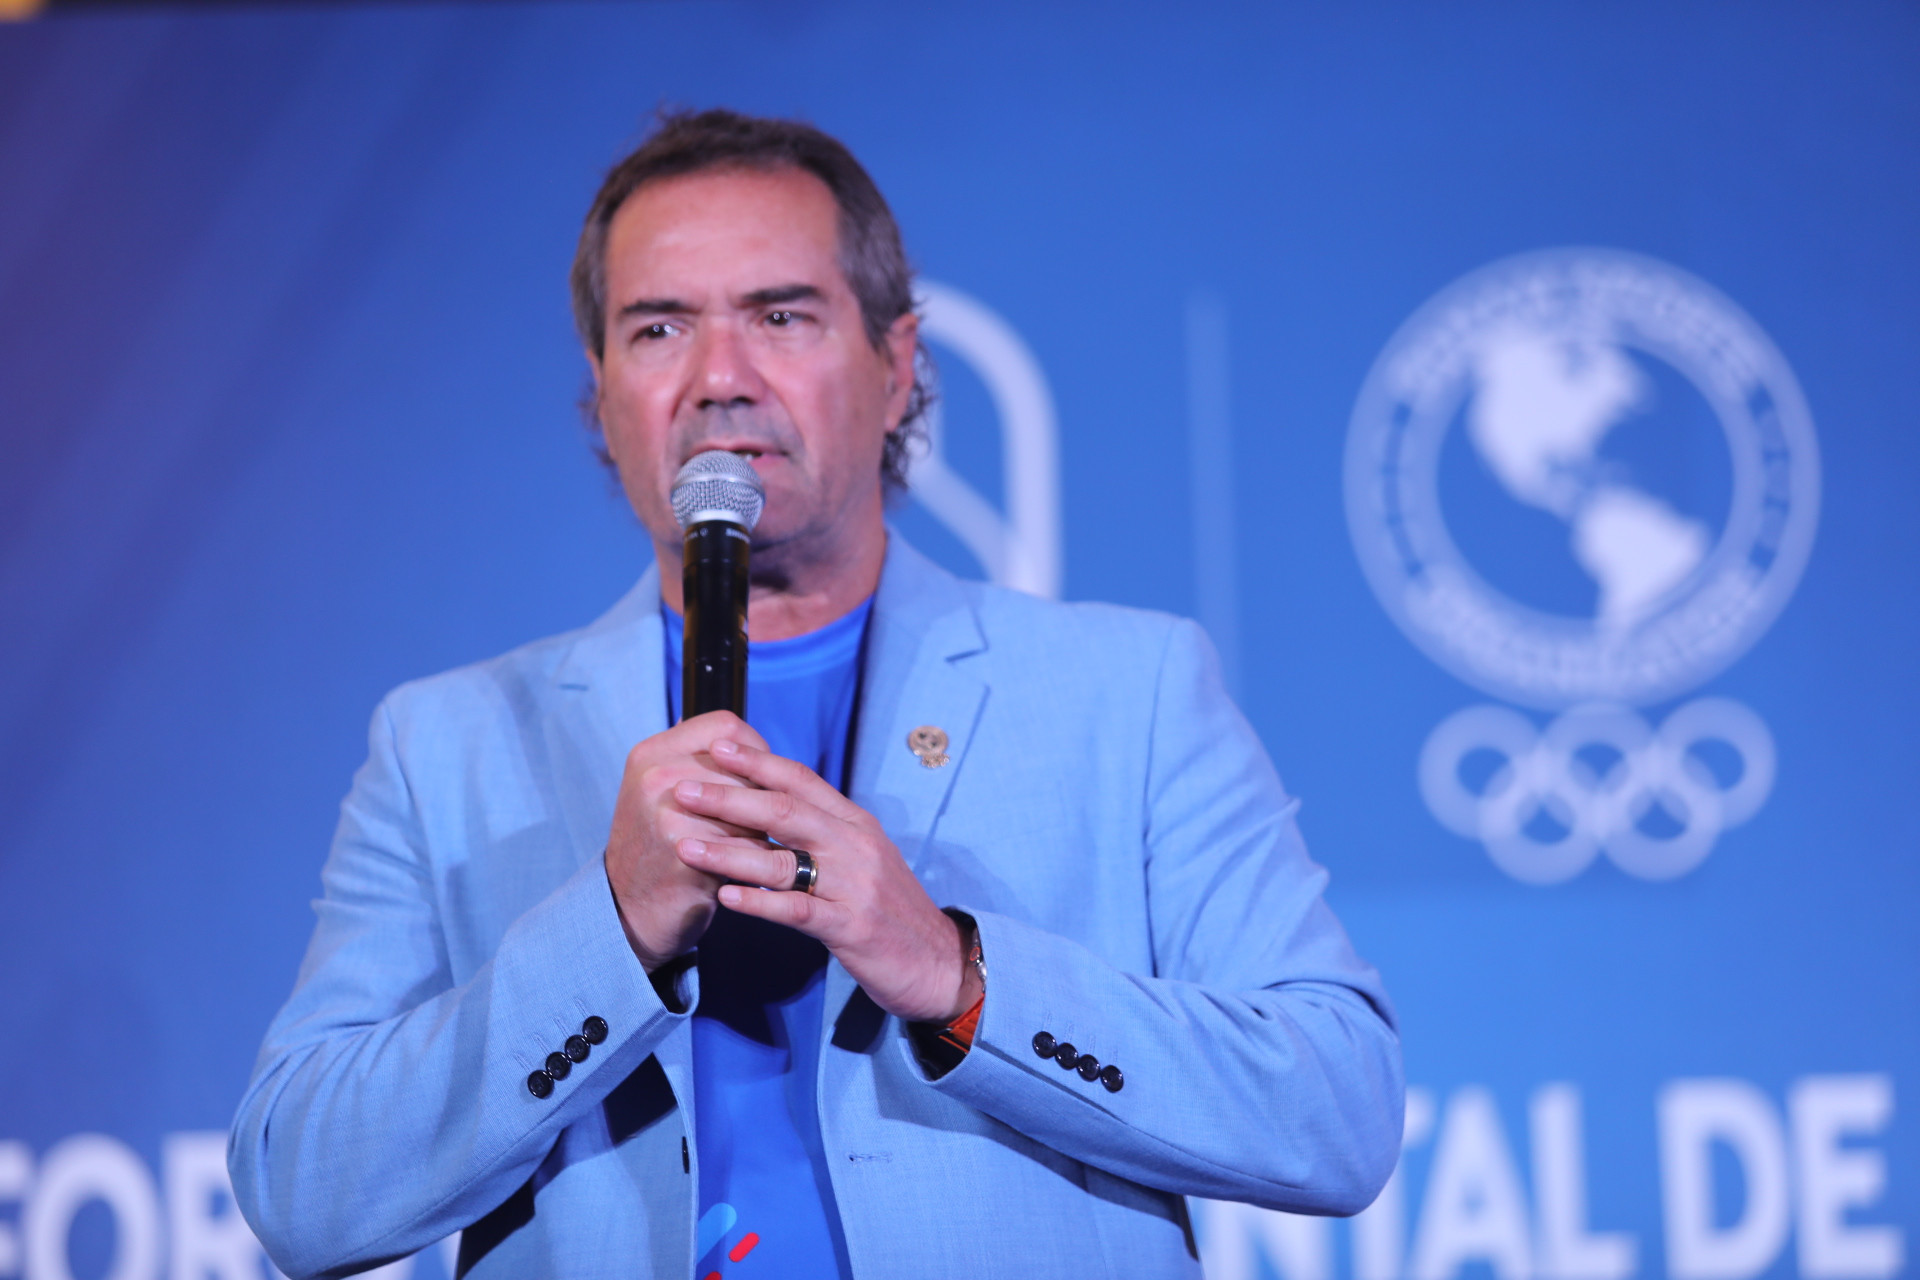 Panam Sports President Neven Ilic pledged $5,000 of extra support to all 41 Athlete Commissions within the organisation on day one of the Panam Sports Athlete Forum in Cancun ©Panam Sports